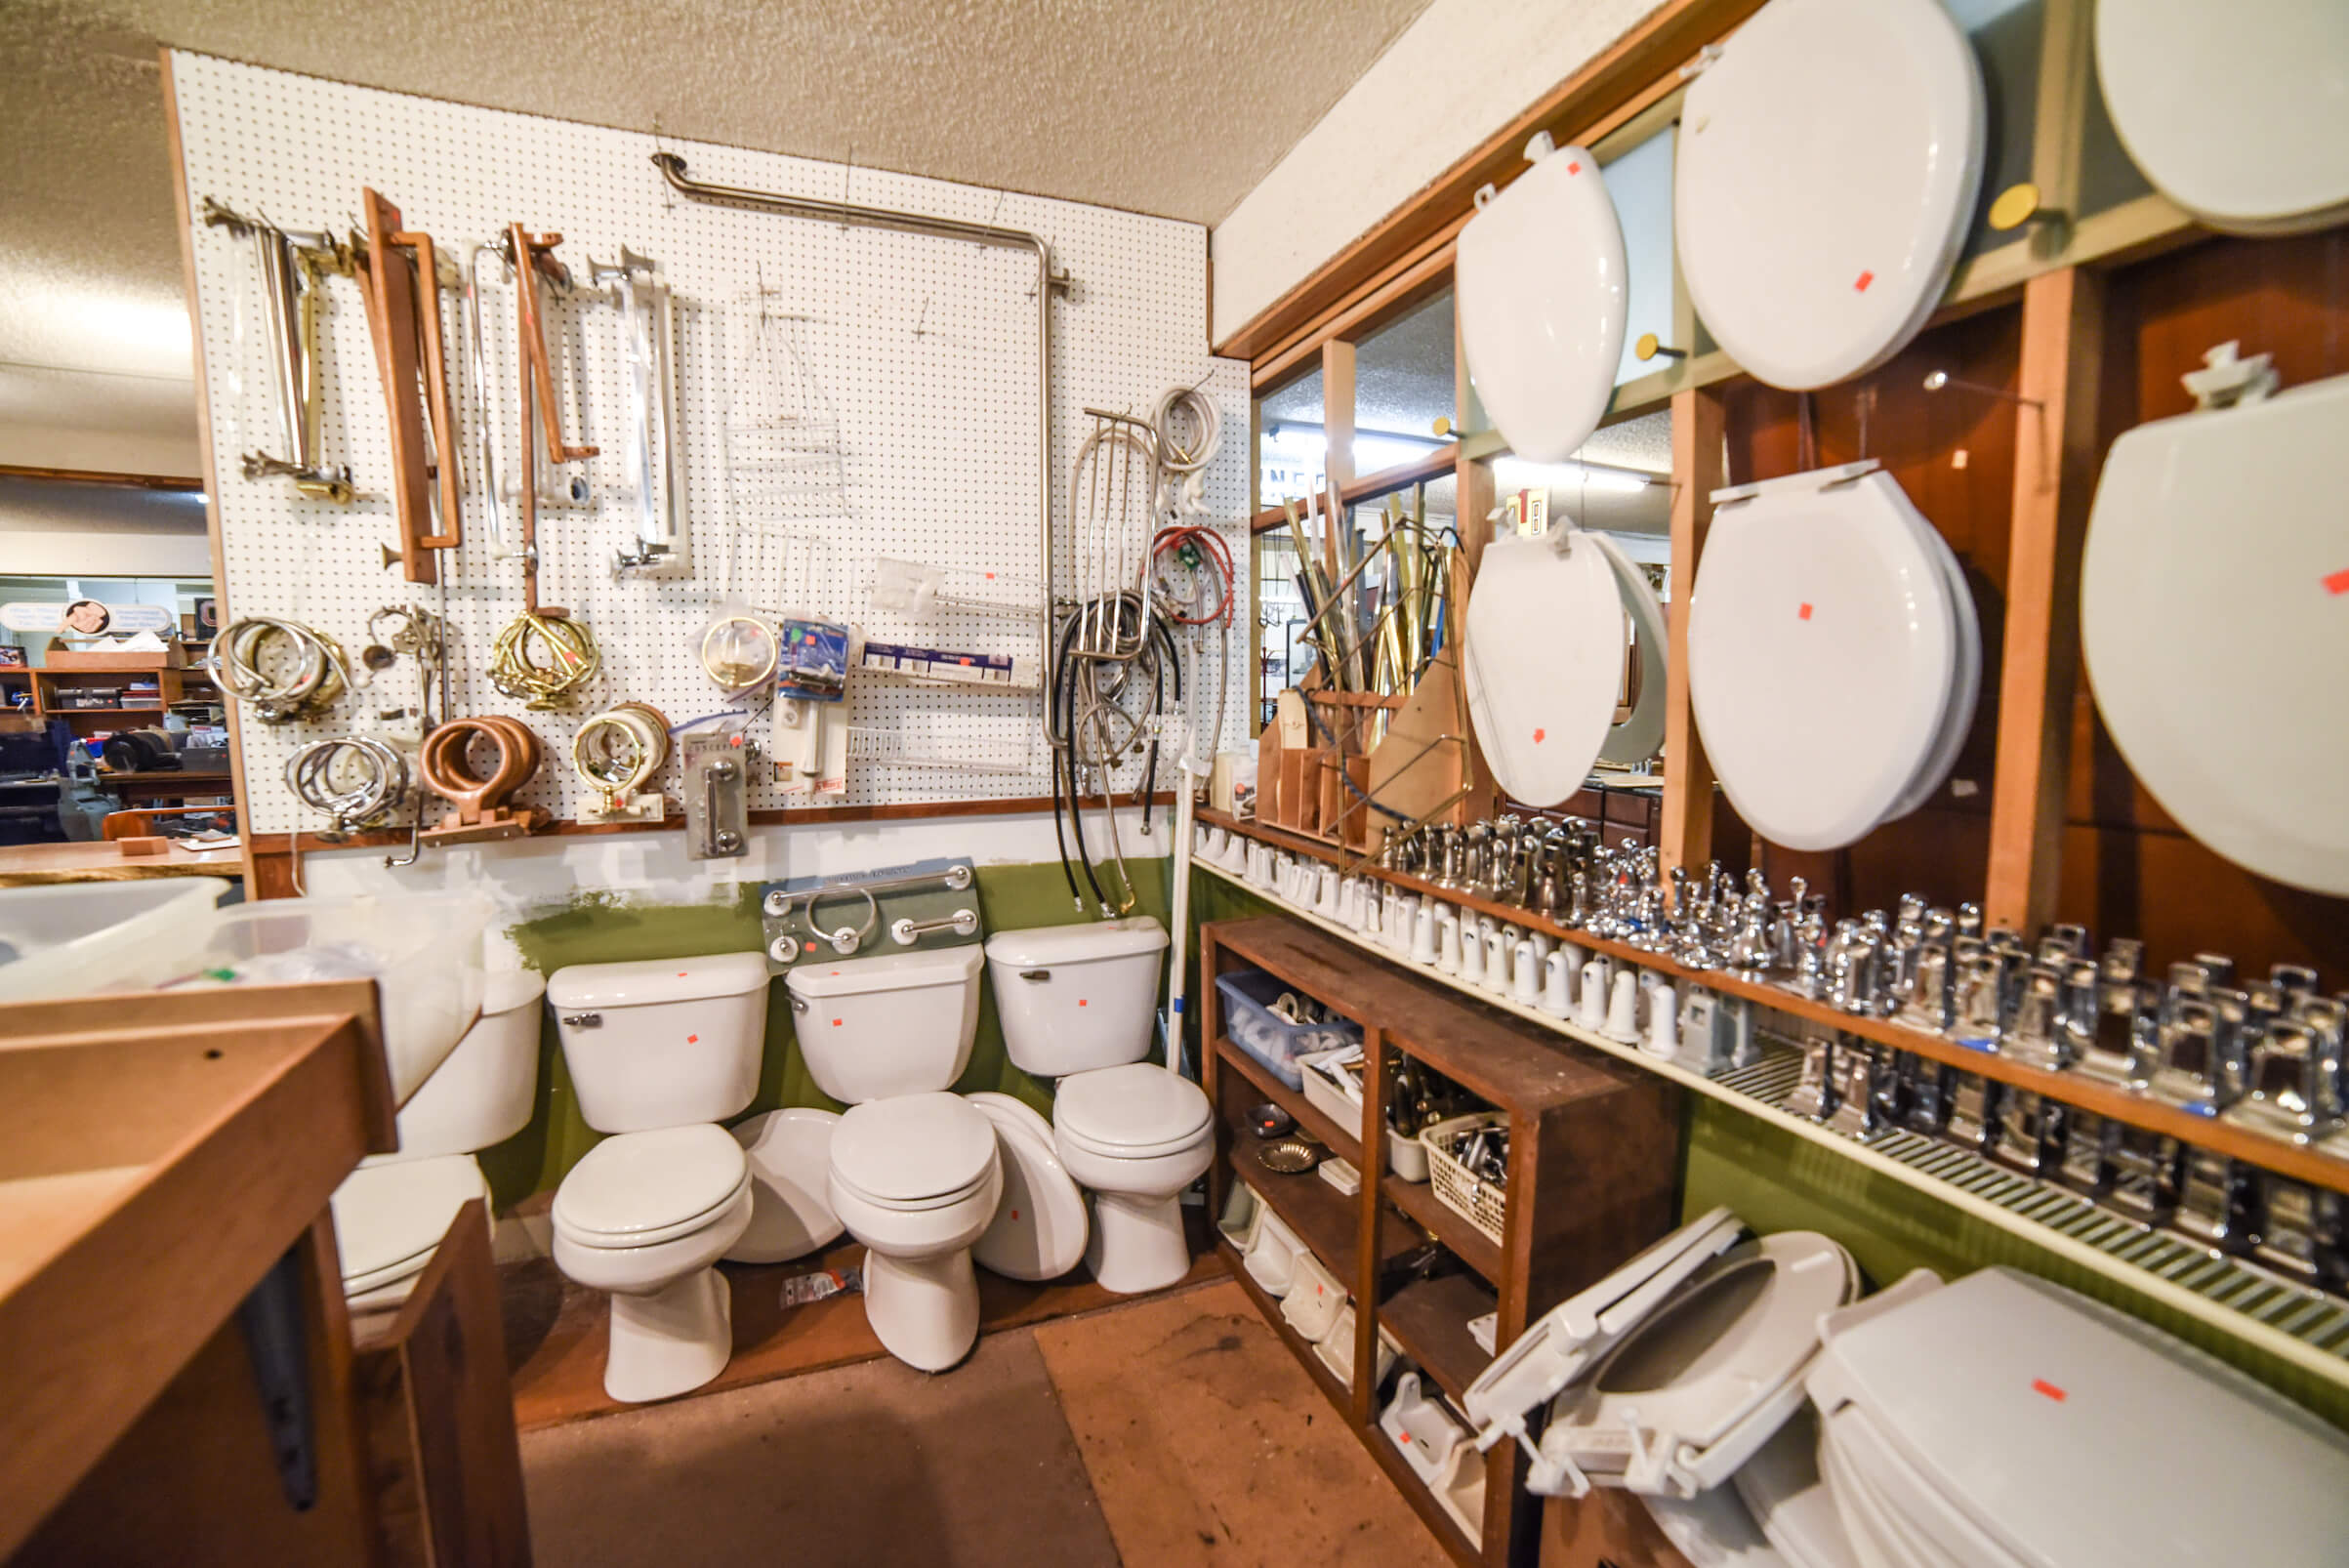 Our plumbing section has plenty of used toilets to choose from